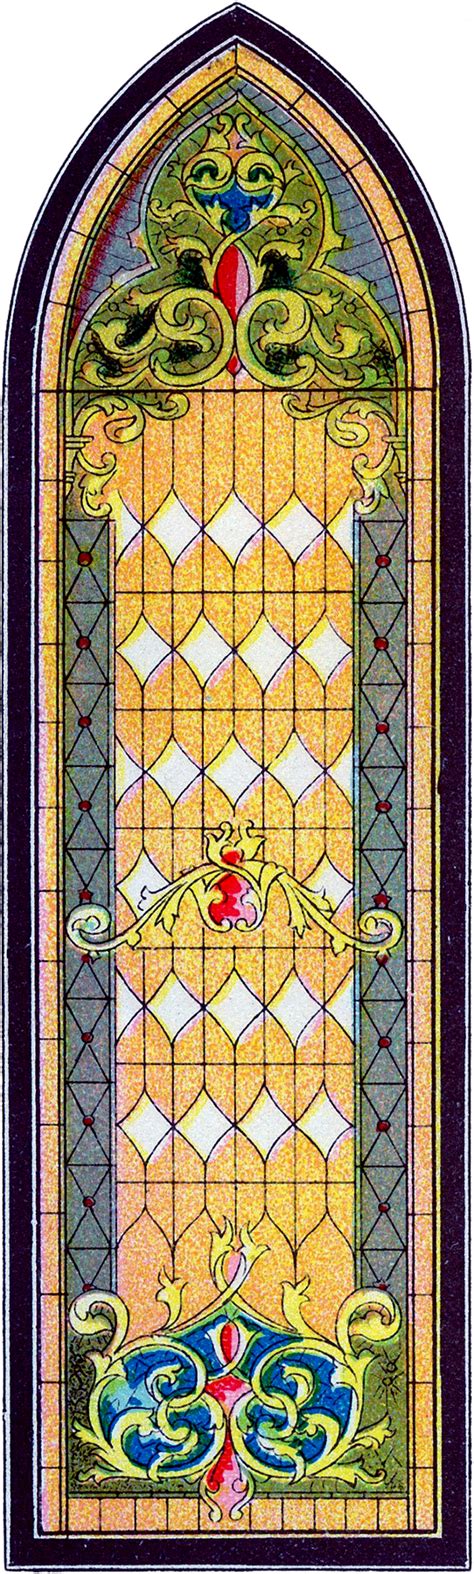 12 Stained Glass Images Church Windows The Graphics Fairy